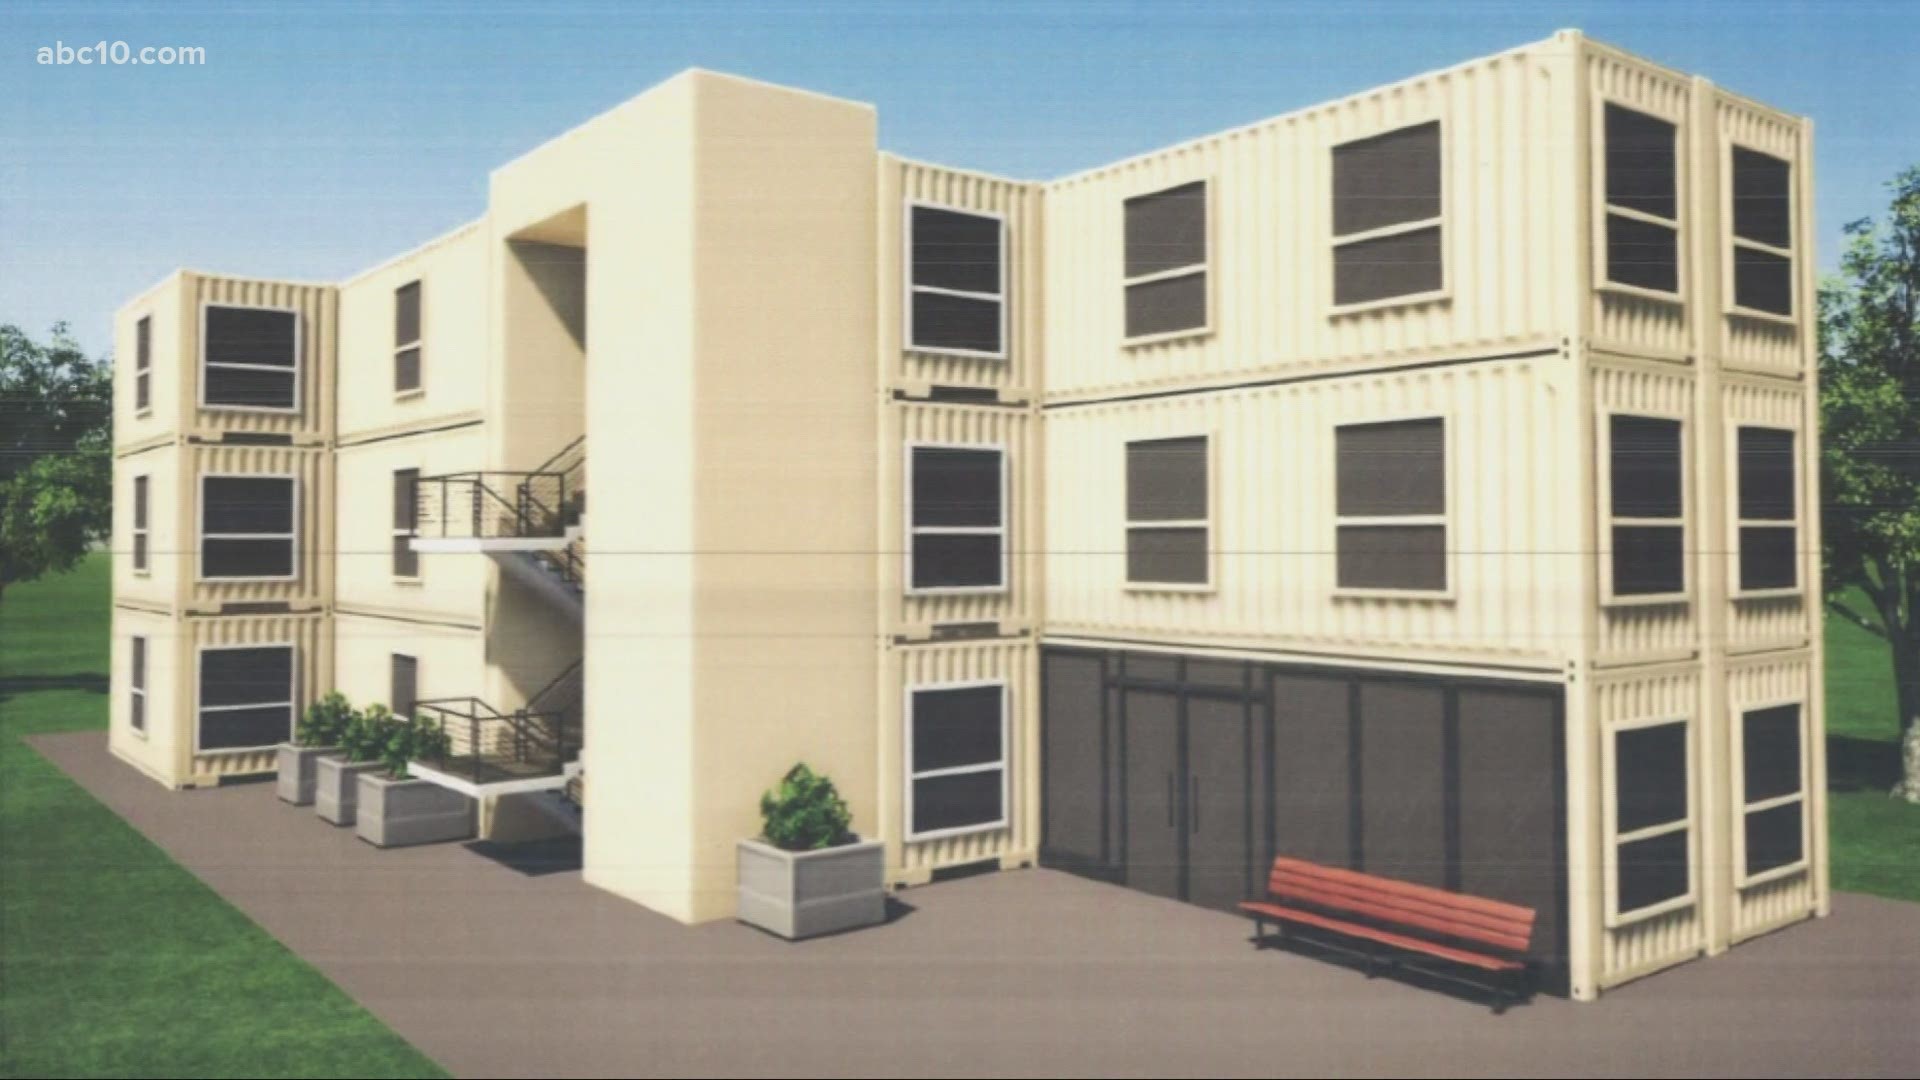 The Stockton homeless shelter's plan is to make a three-story, 90-bed men's facility created from shipping containers in about nine months.